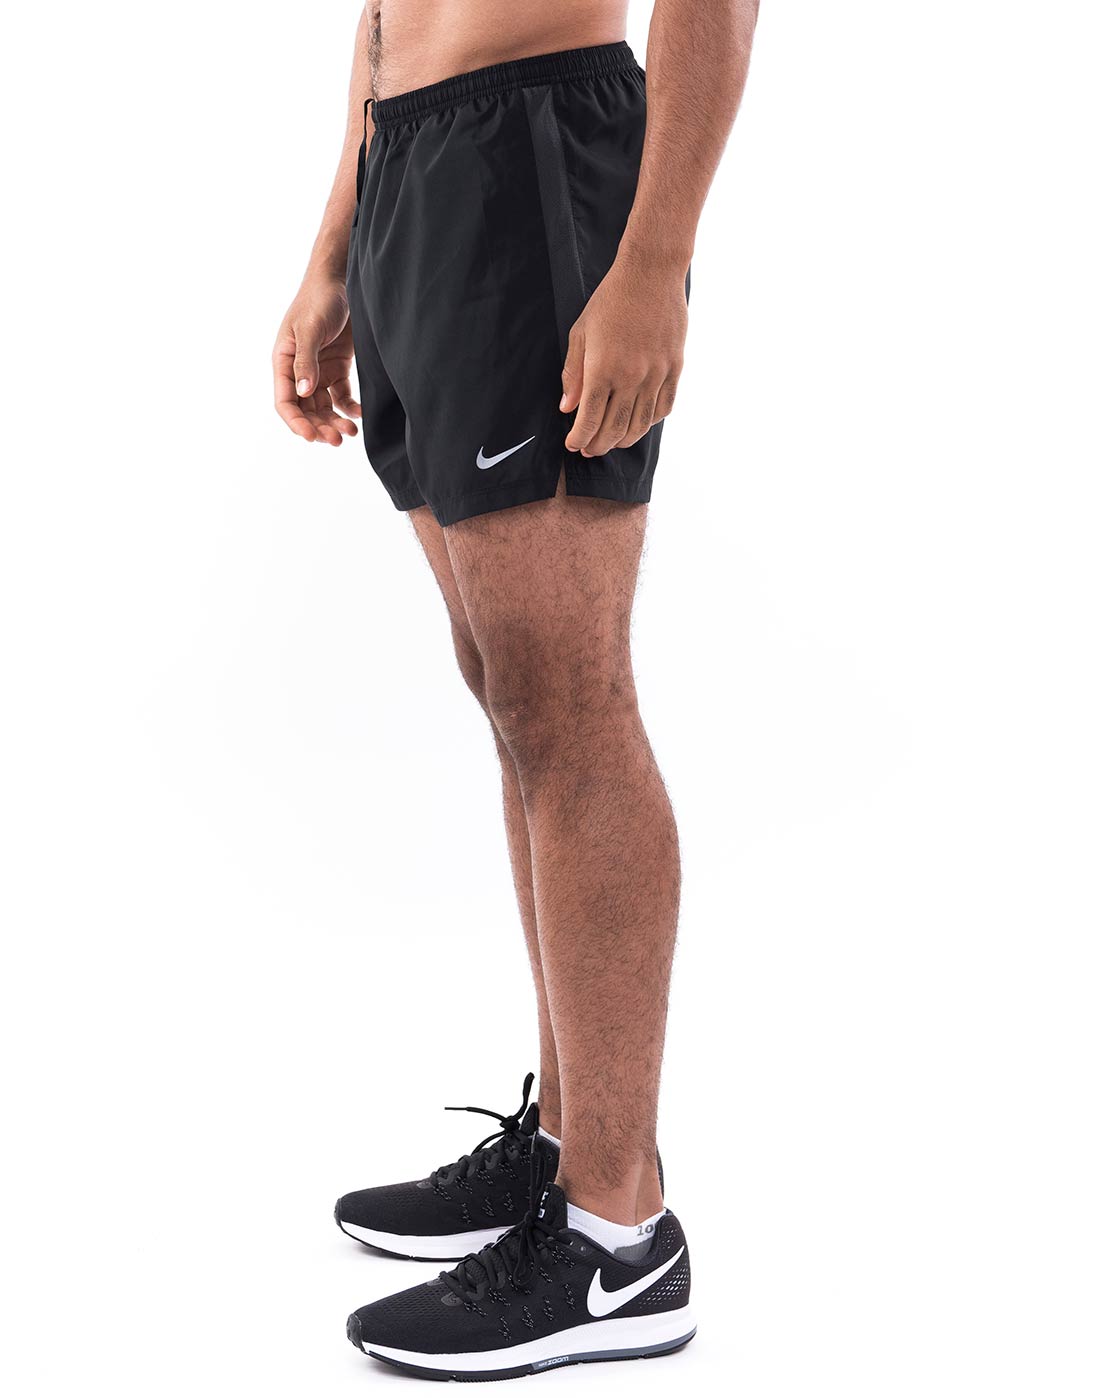 nike challenger 5 inch shorts